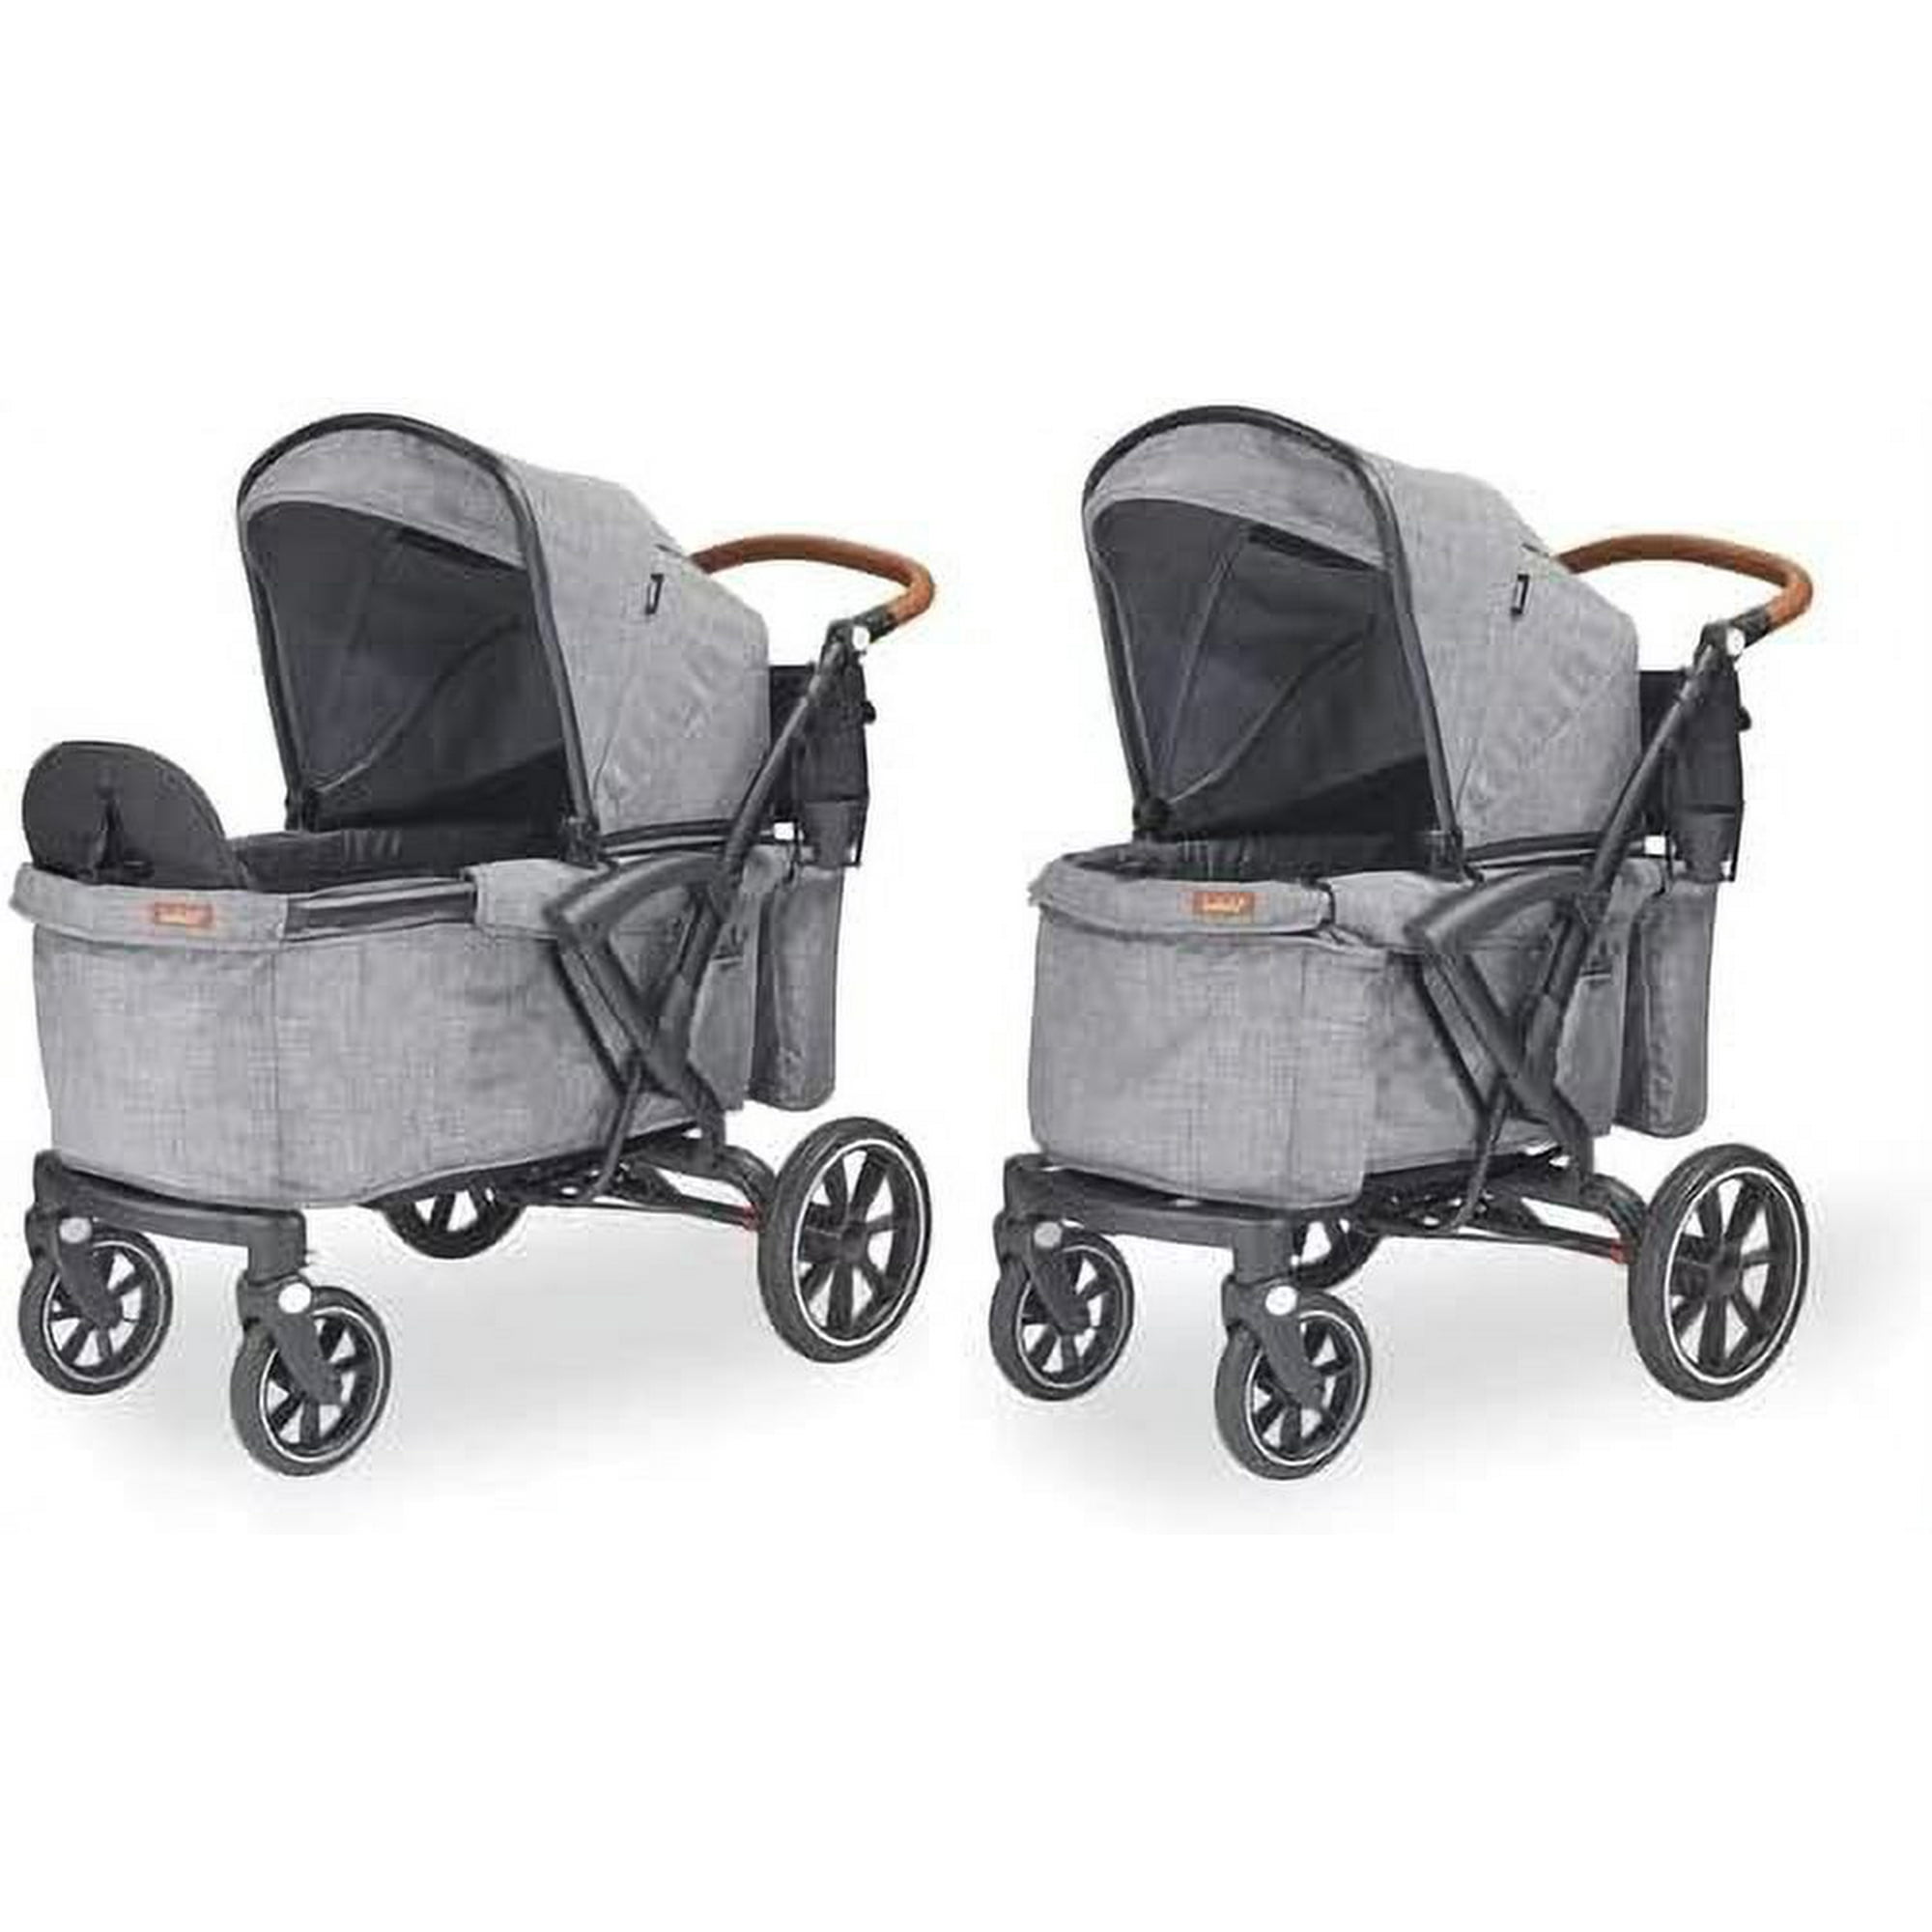 Faldgruber Samuel fingeraftryk Larktale Sprout Single-to-Double Stroller/Wagon - Expandable and Foldable  Stroller Wagon for Kids with Canopy, Storage, and Accessories - Nightcliff  Stone - Walmart.com